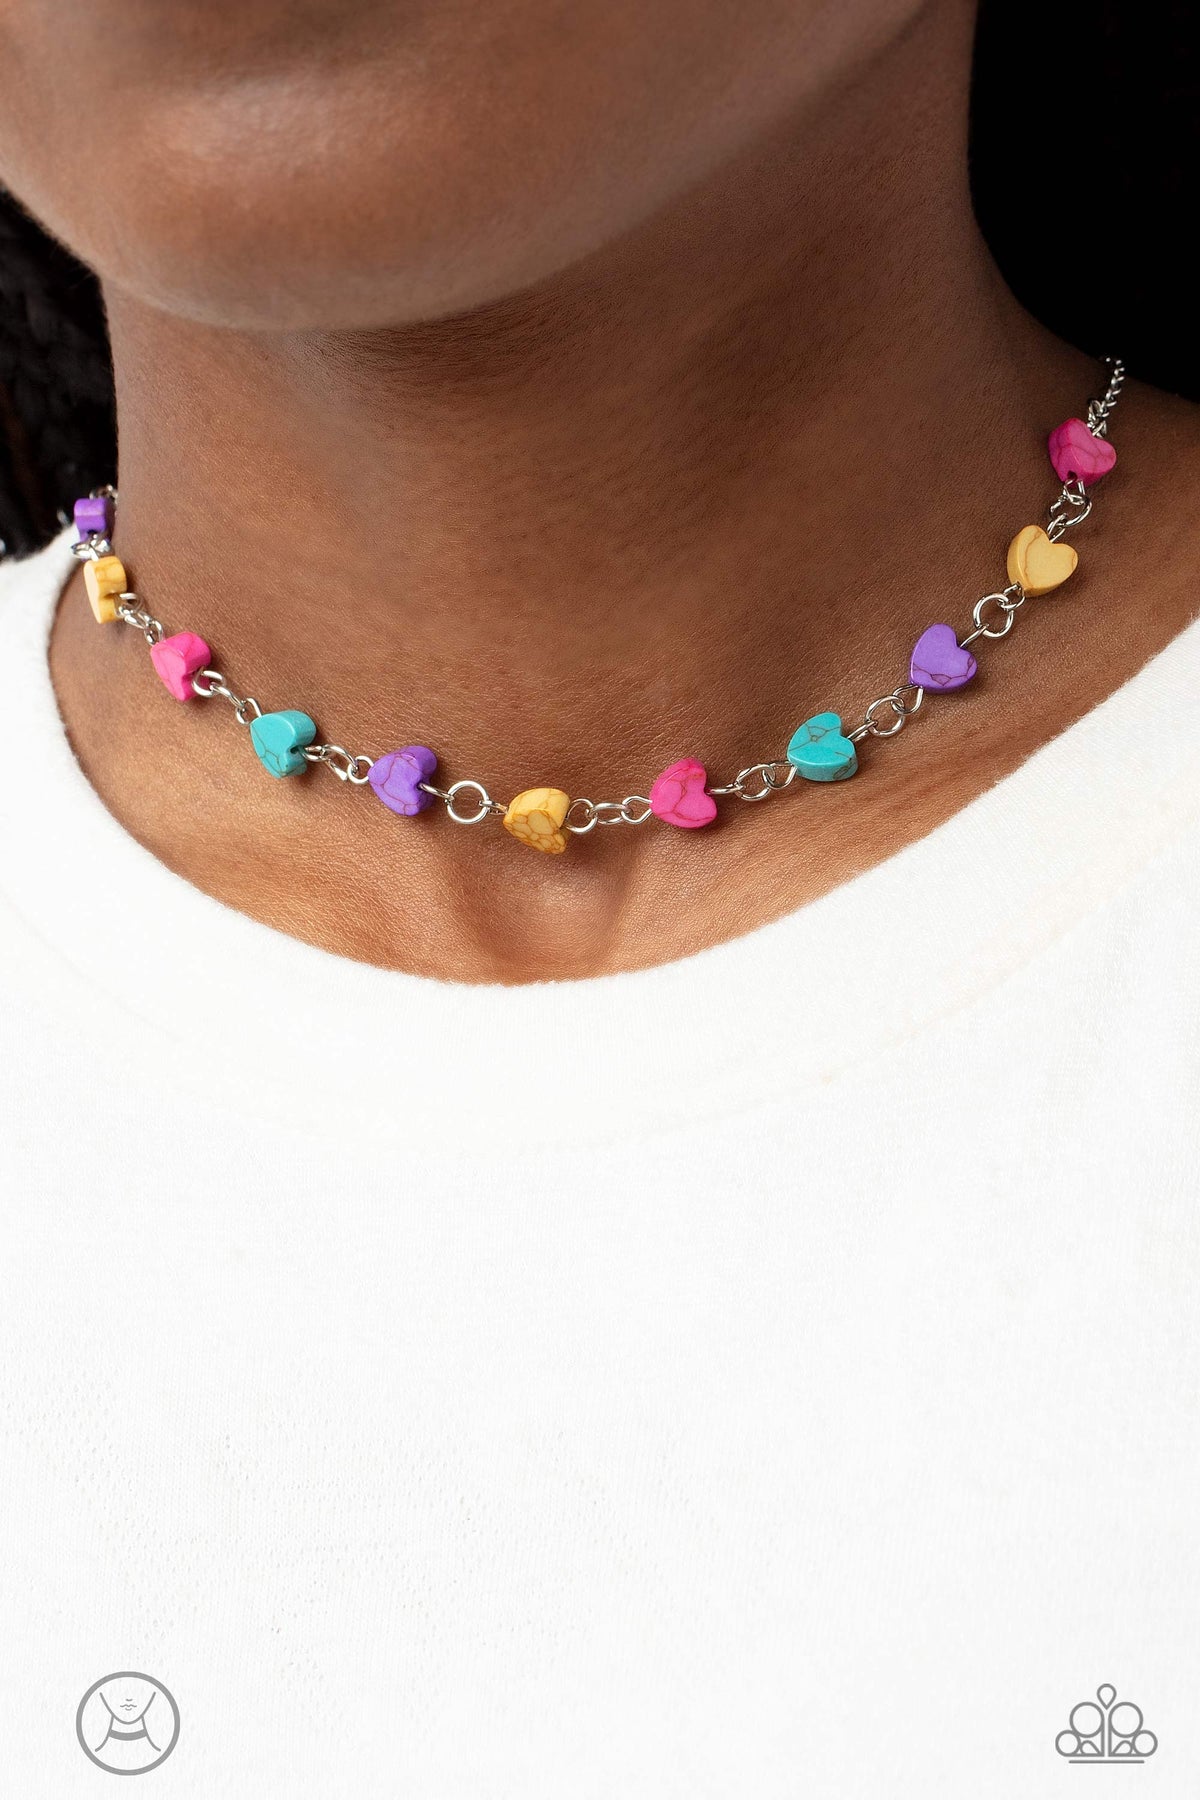 Wild at Heart Pink &amp; Multi Stone Heart Choker Necklace - Paparazzi Accessories-on model - CarasShop.com - $5 Jewelry by Cara Jewels